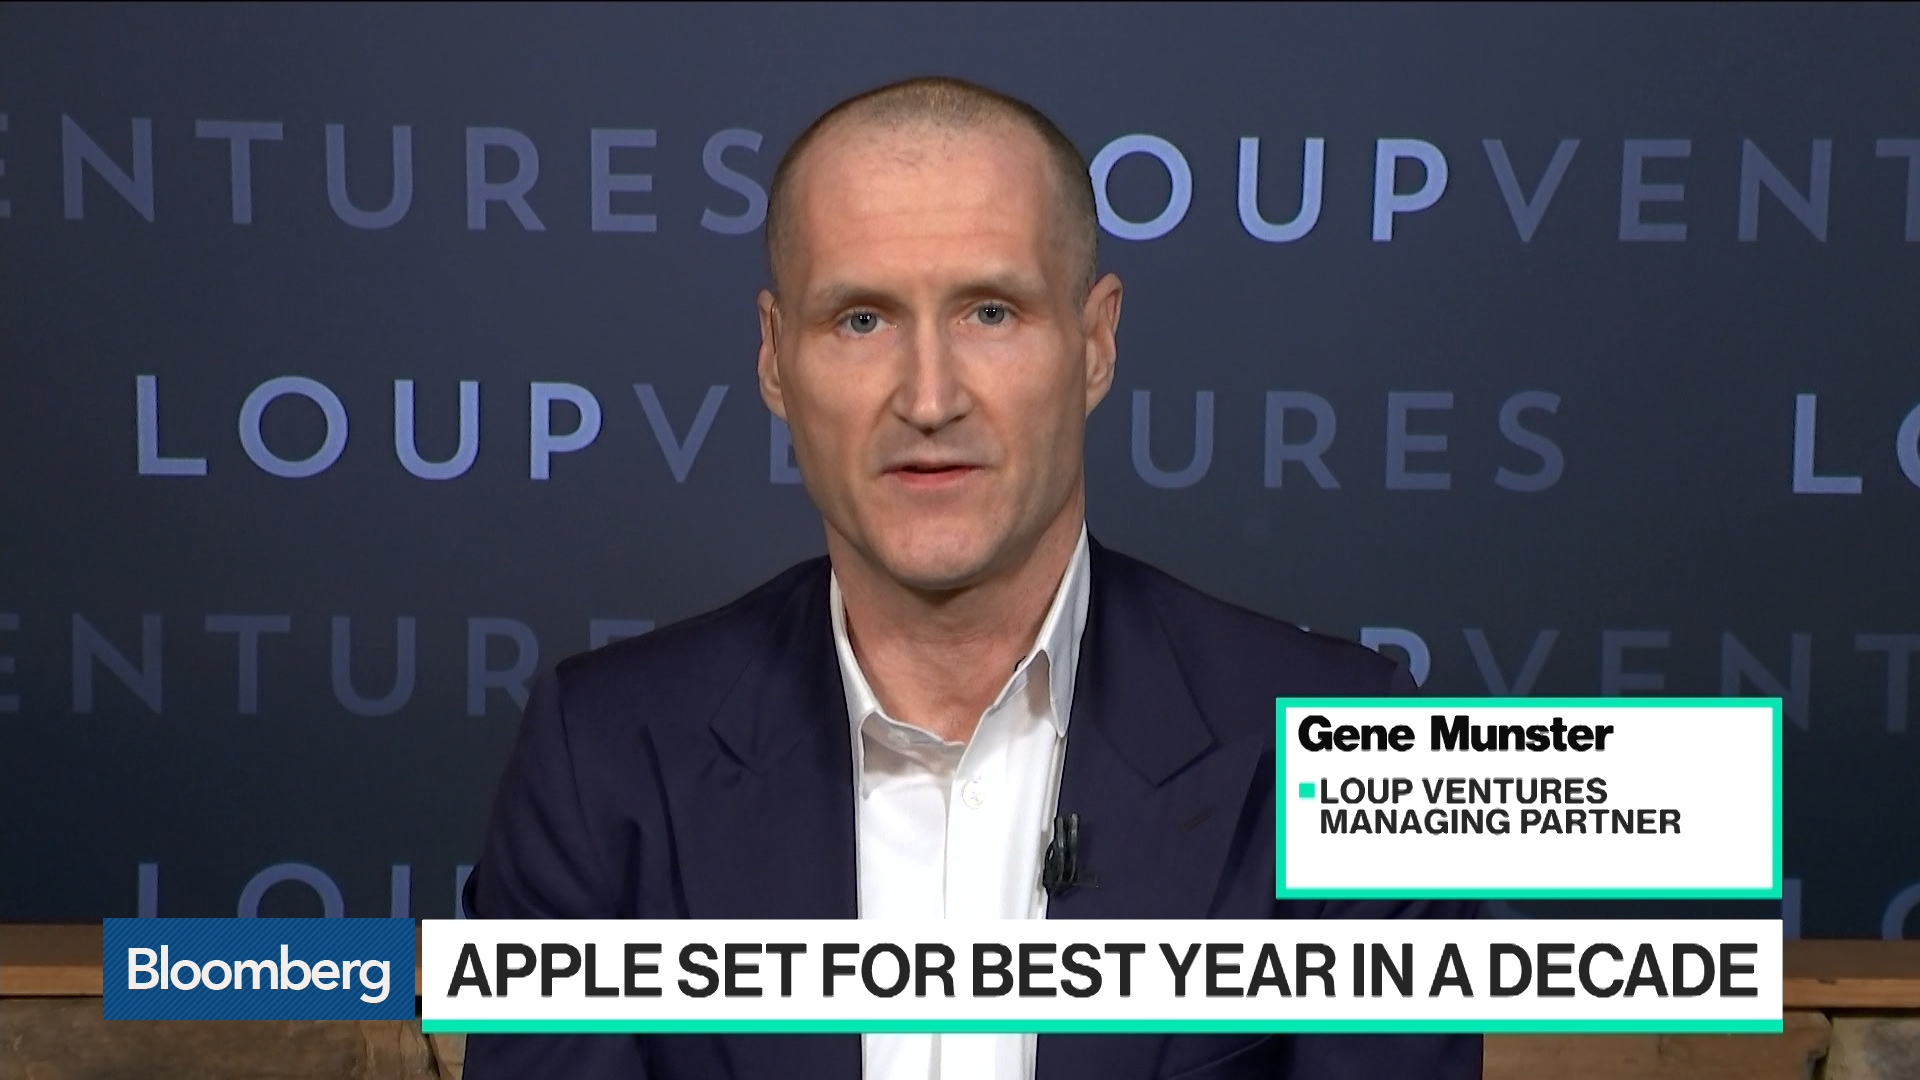 Flipboard: Gene Munster's Predictions for Apple and Tesla in 20201920 x 1080